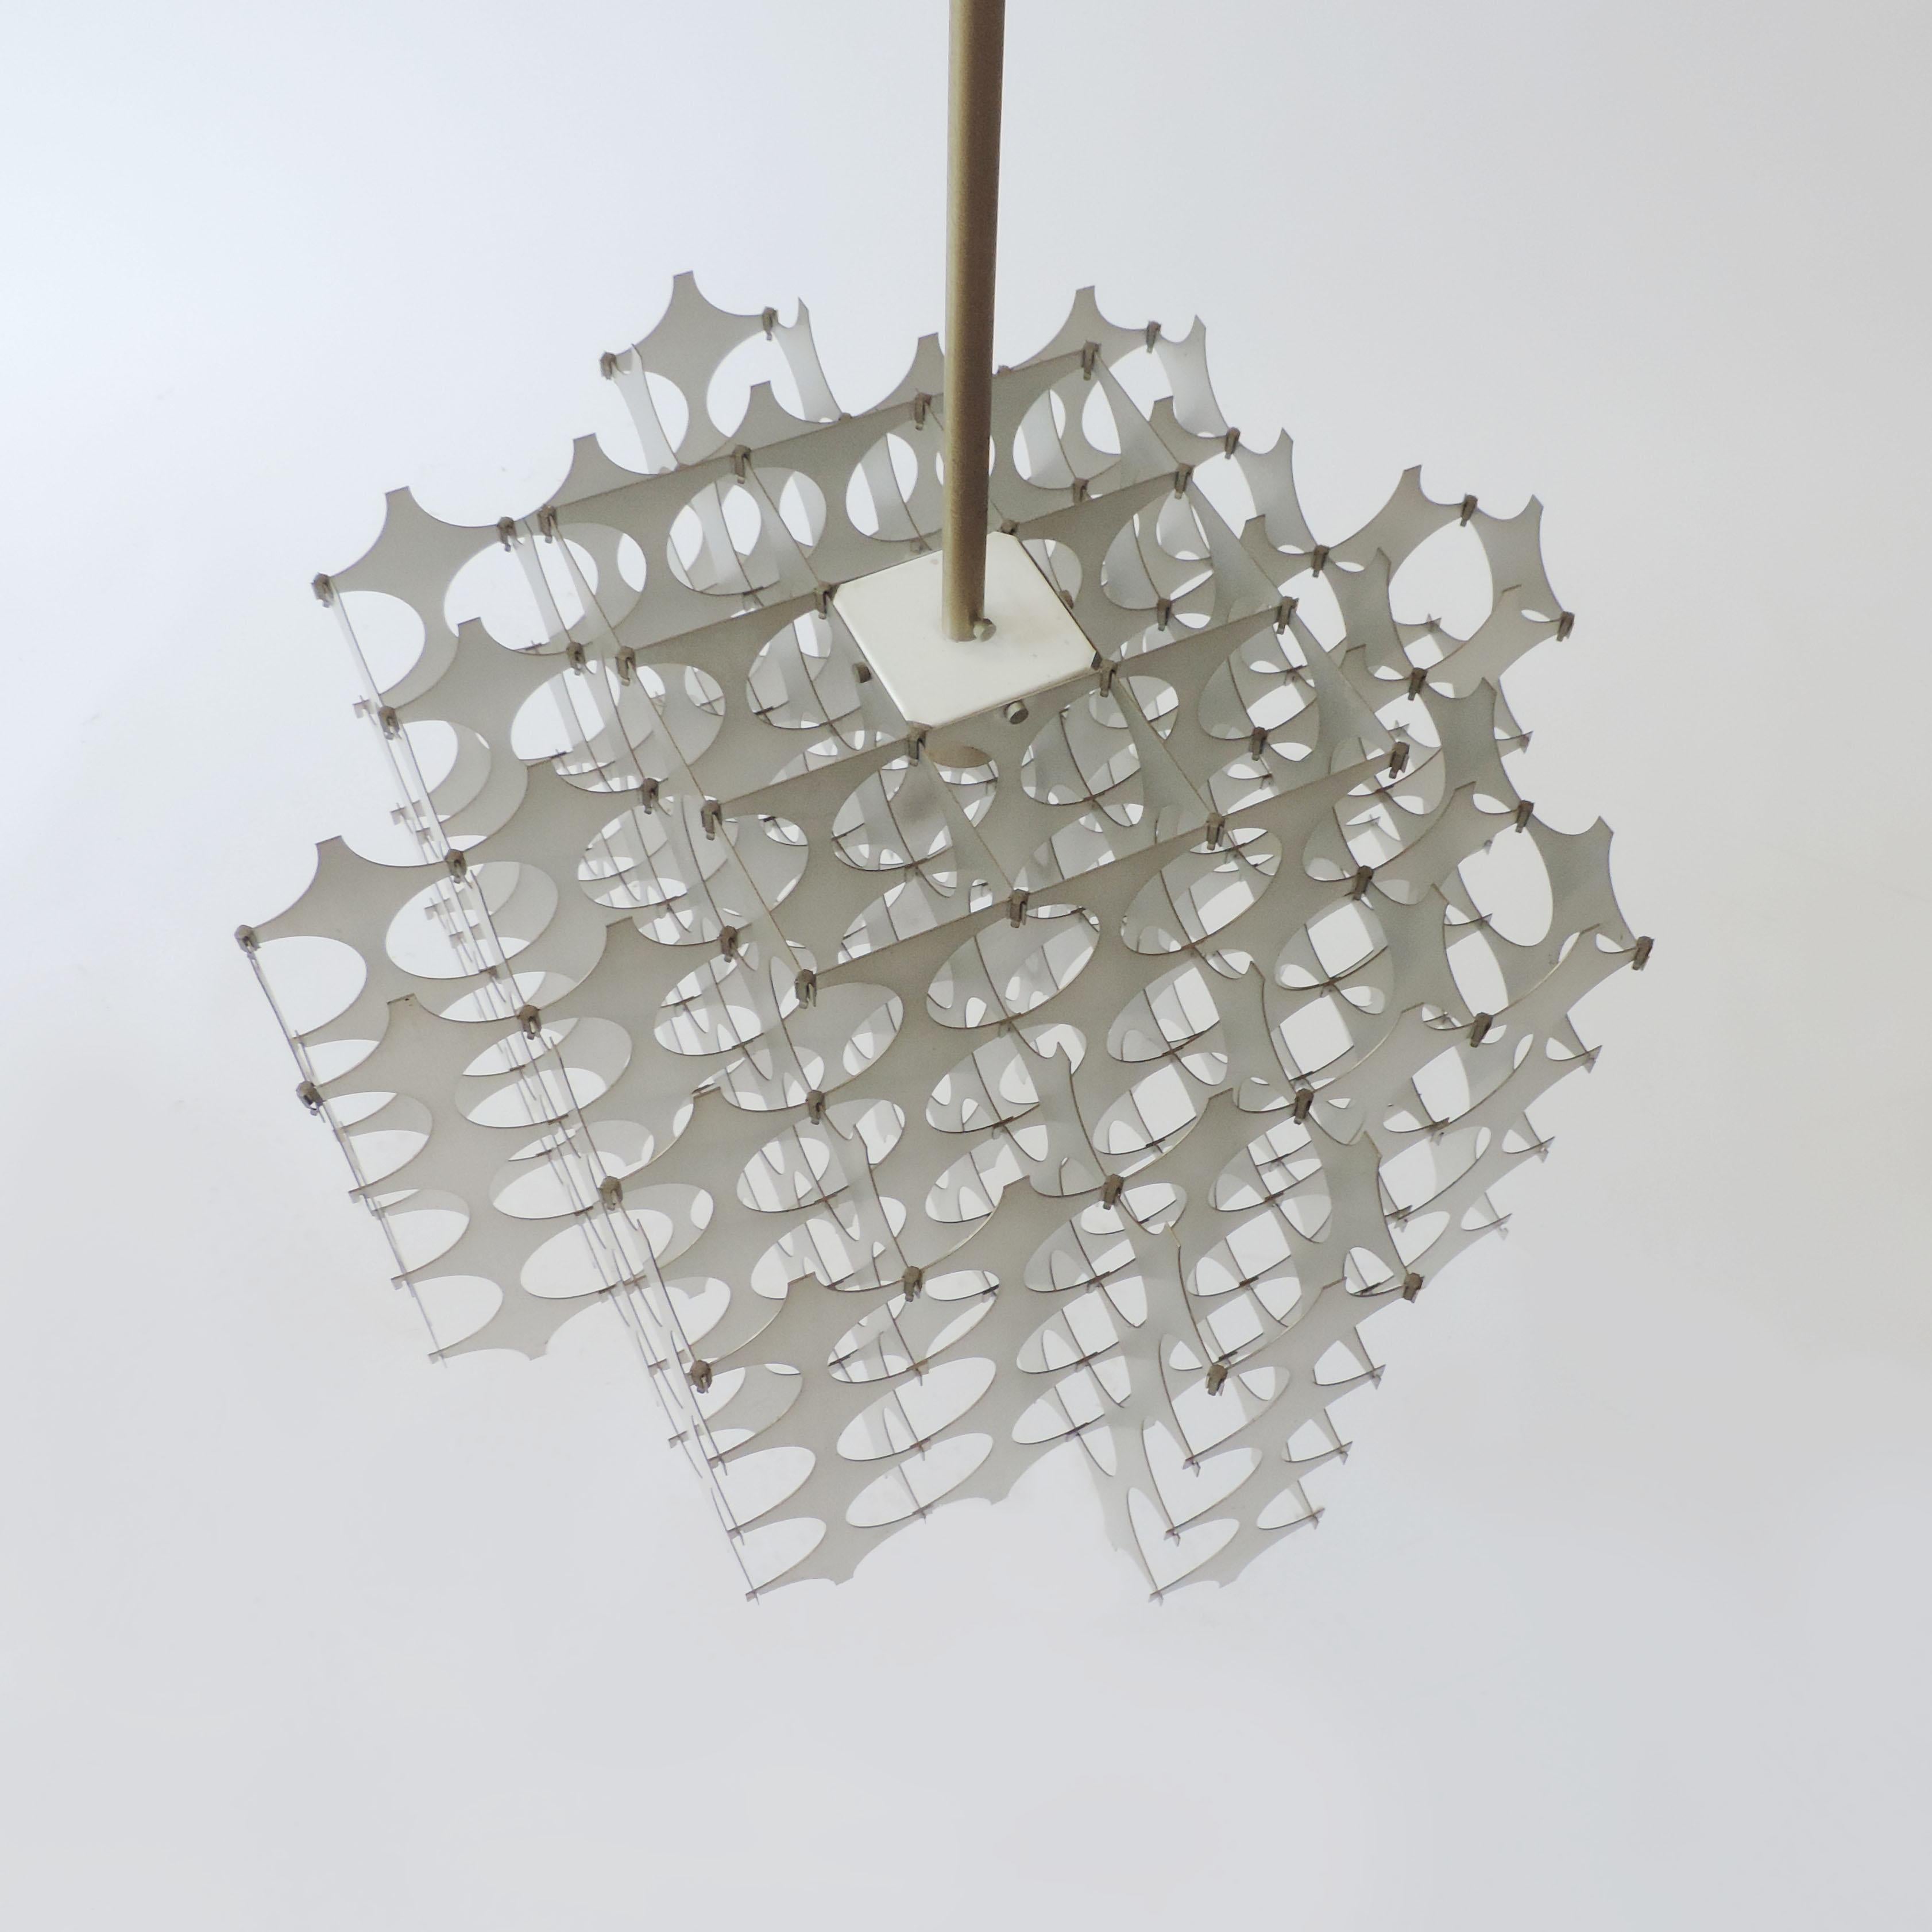 Mid-20th Century Mario Marenco Kinetic Ceiling Lamp Mod. Cynthia for Artemide, Italy, 1968